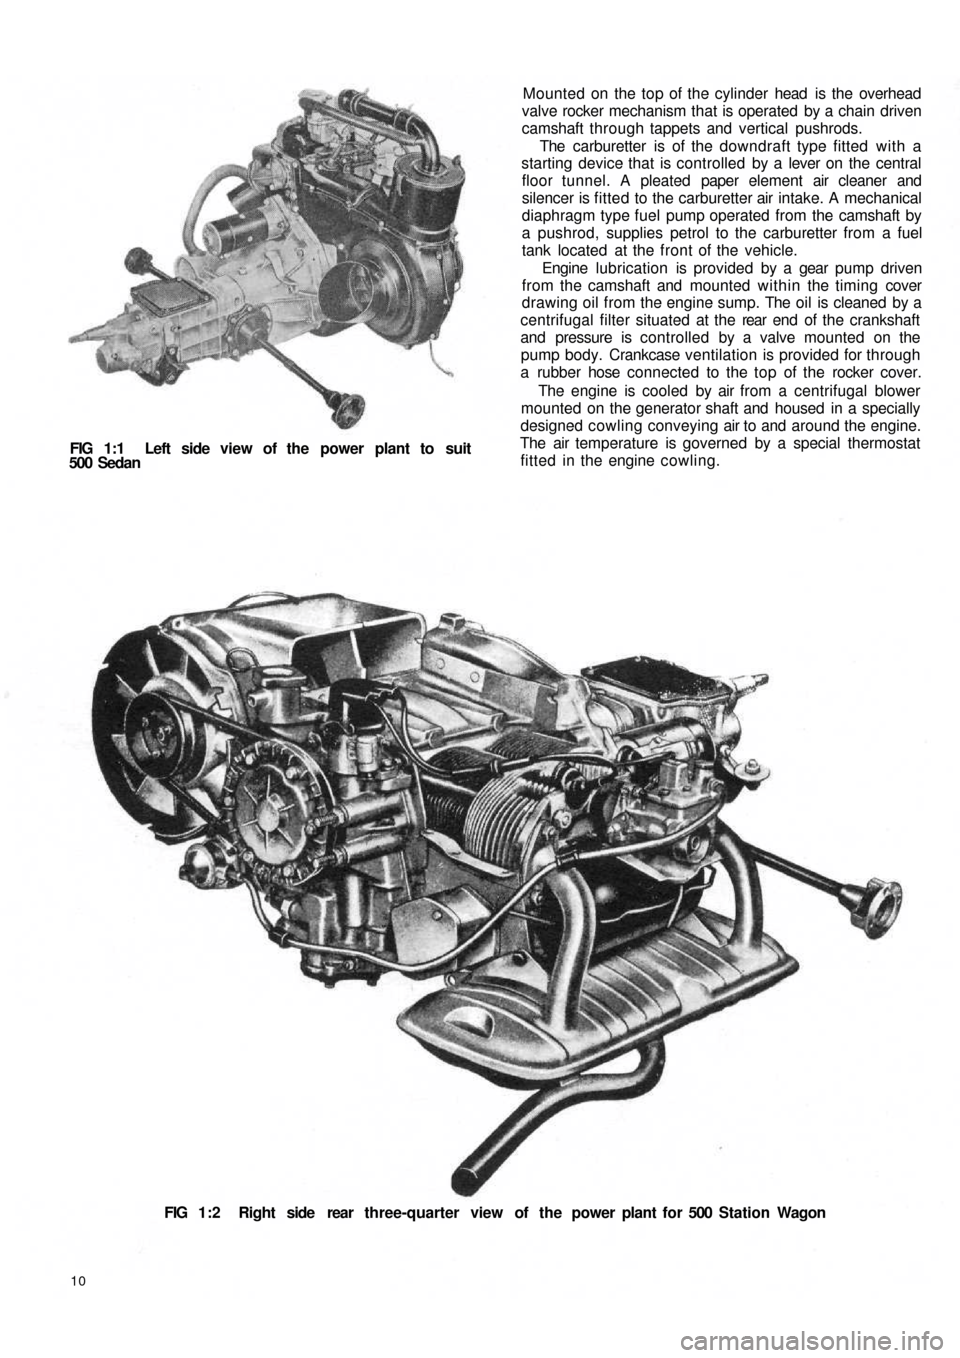 FIAT 500 1960 1.G Workshop Manual FIG 1:1  Left side view of the power plant to suit
500  Sedan
10
FIG 1:2  Right side  rear  three-quarter view of the power plant for 500 Station  Wagon Mounted on the top of the cylinder  head  is th